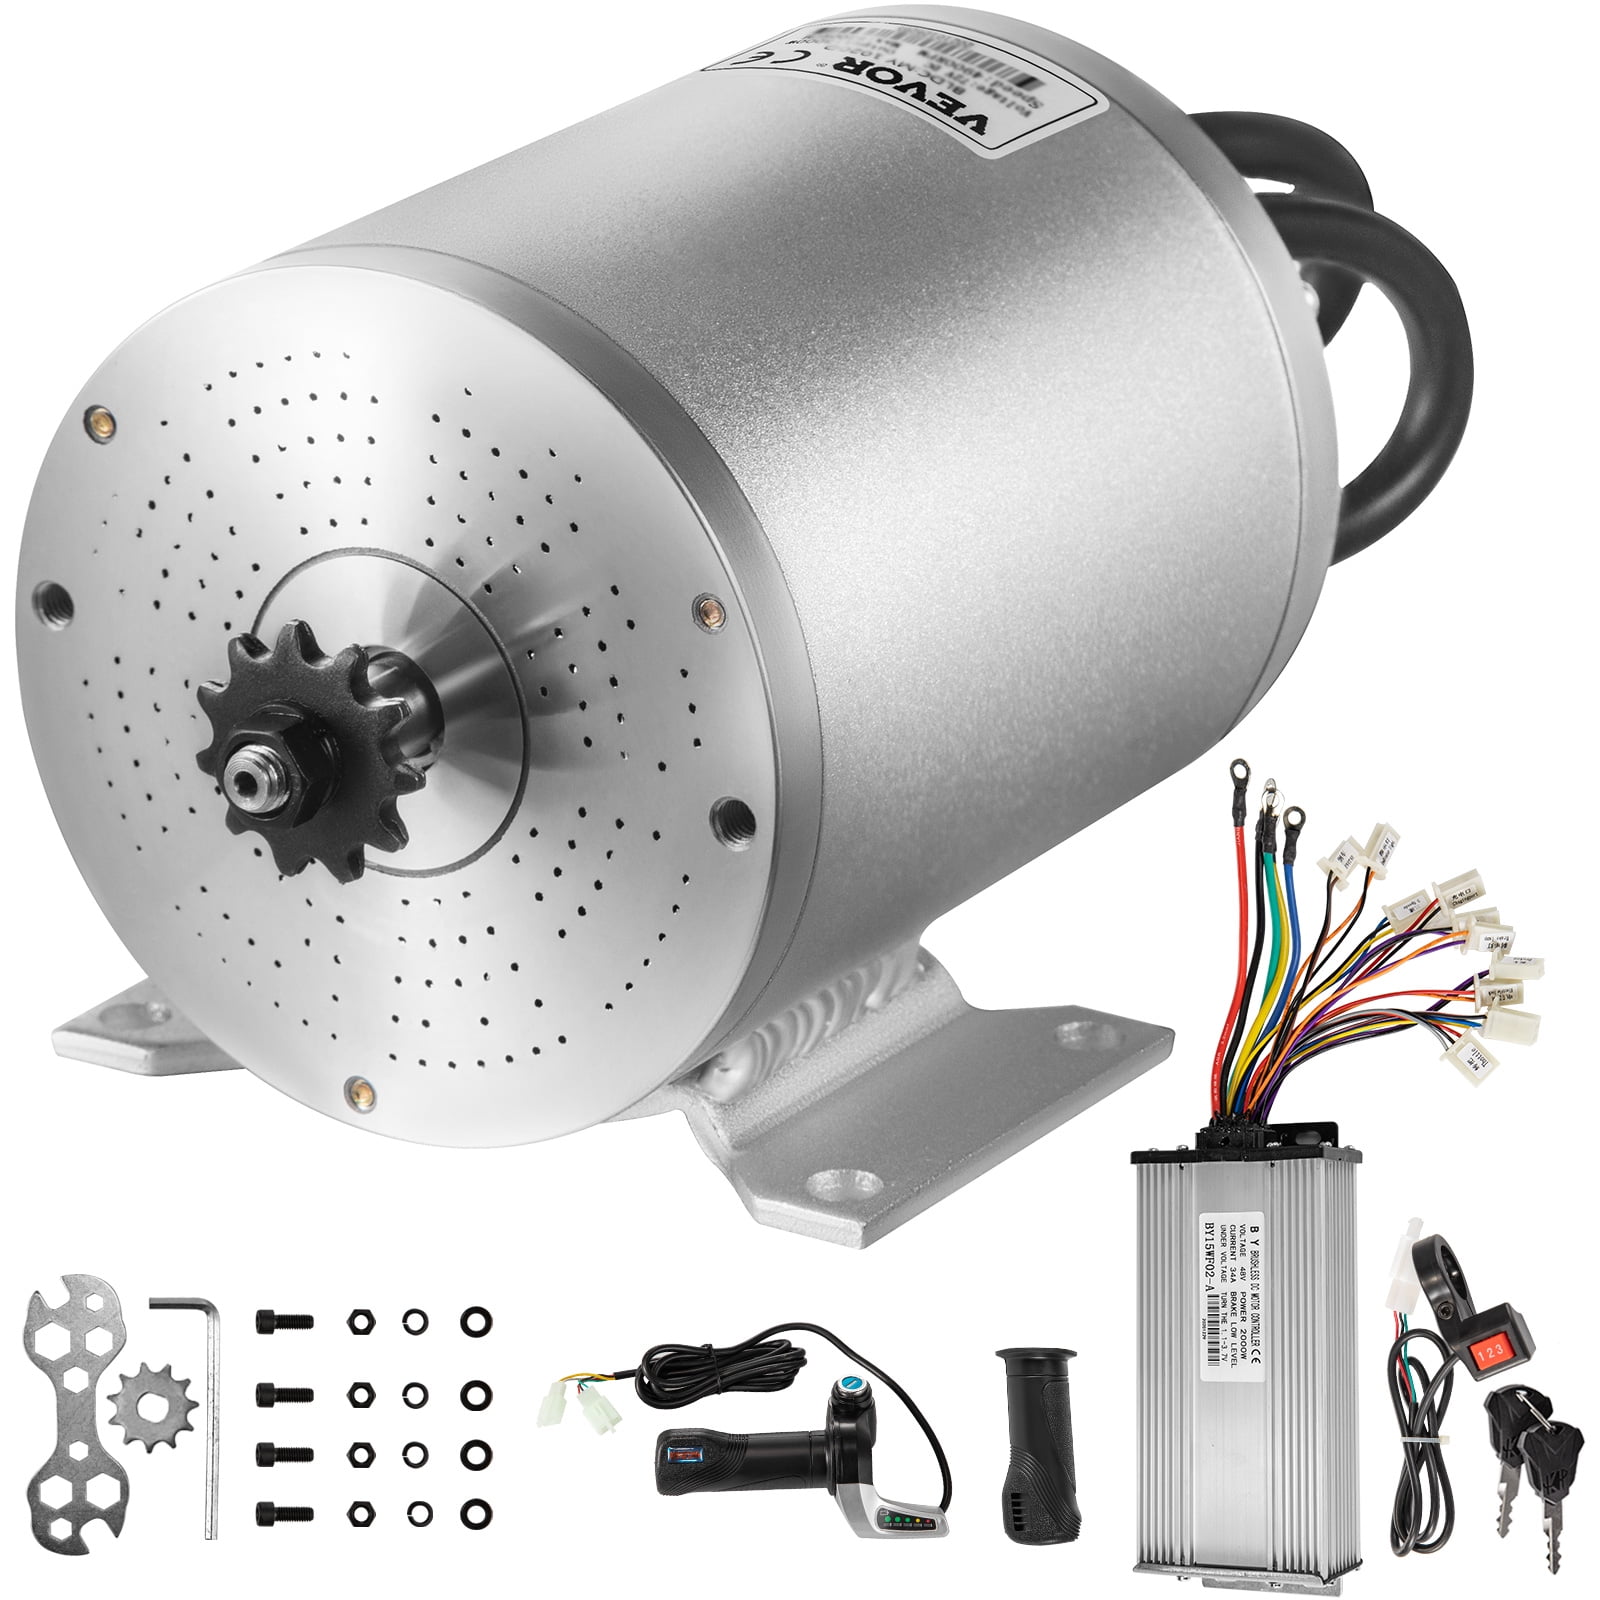 48V 1800W Brushless Motor Kit W/ Controller Chain Sprocket for Electric Scooter 